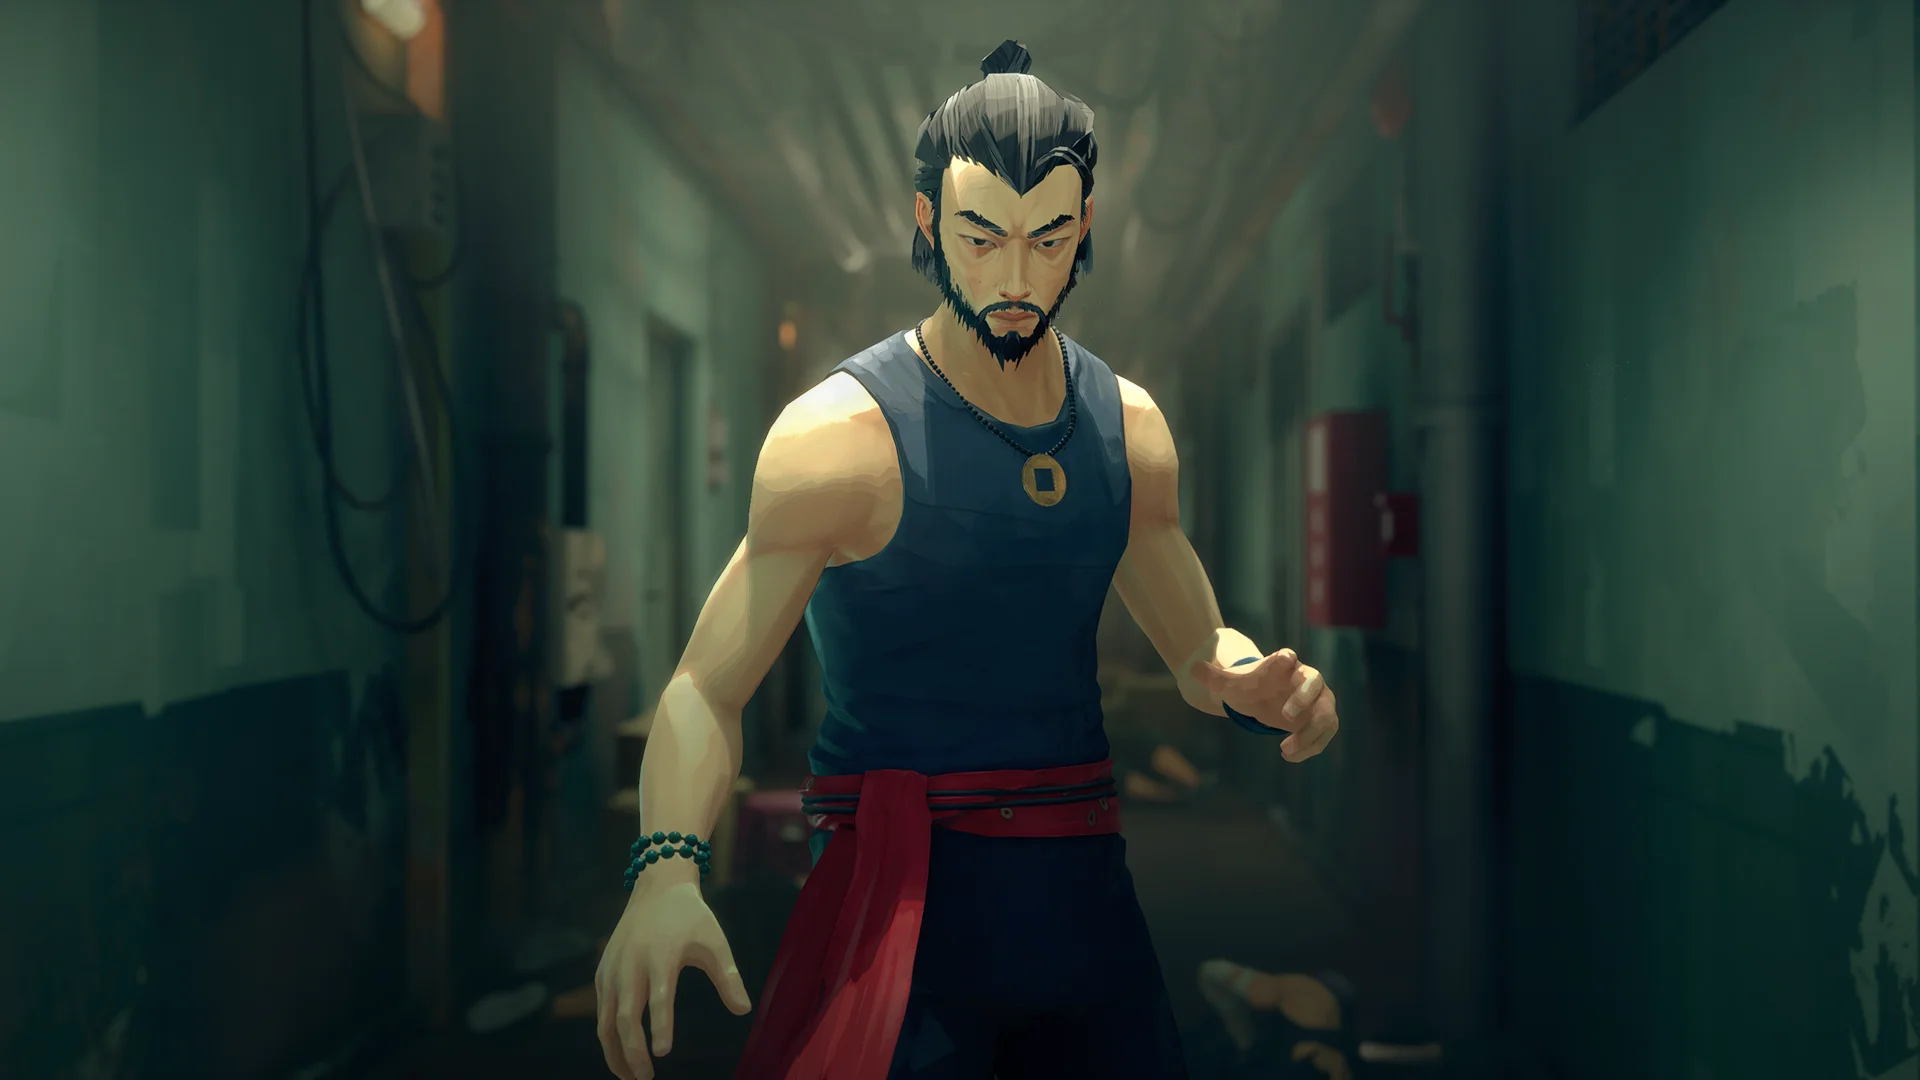 Kung fu action game Sifu has received the latest update